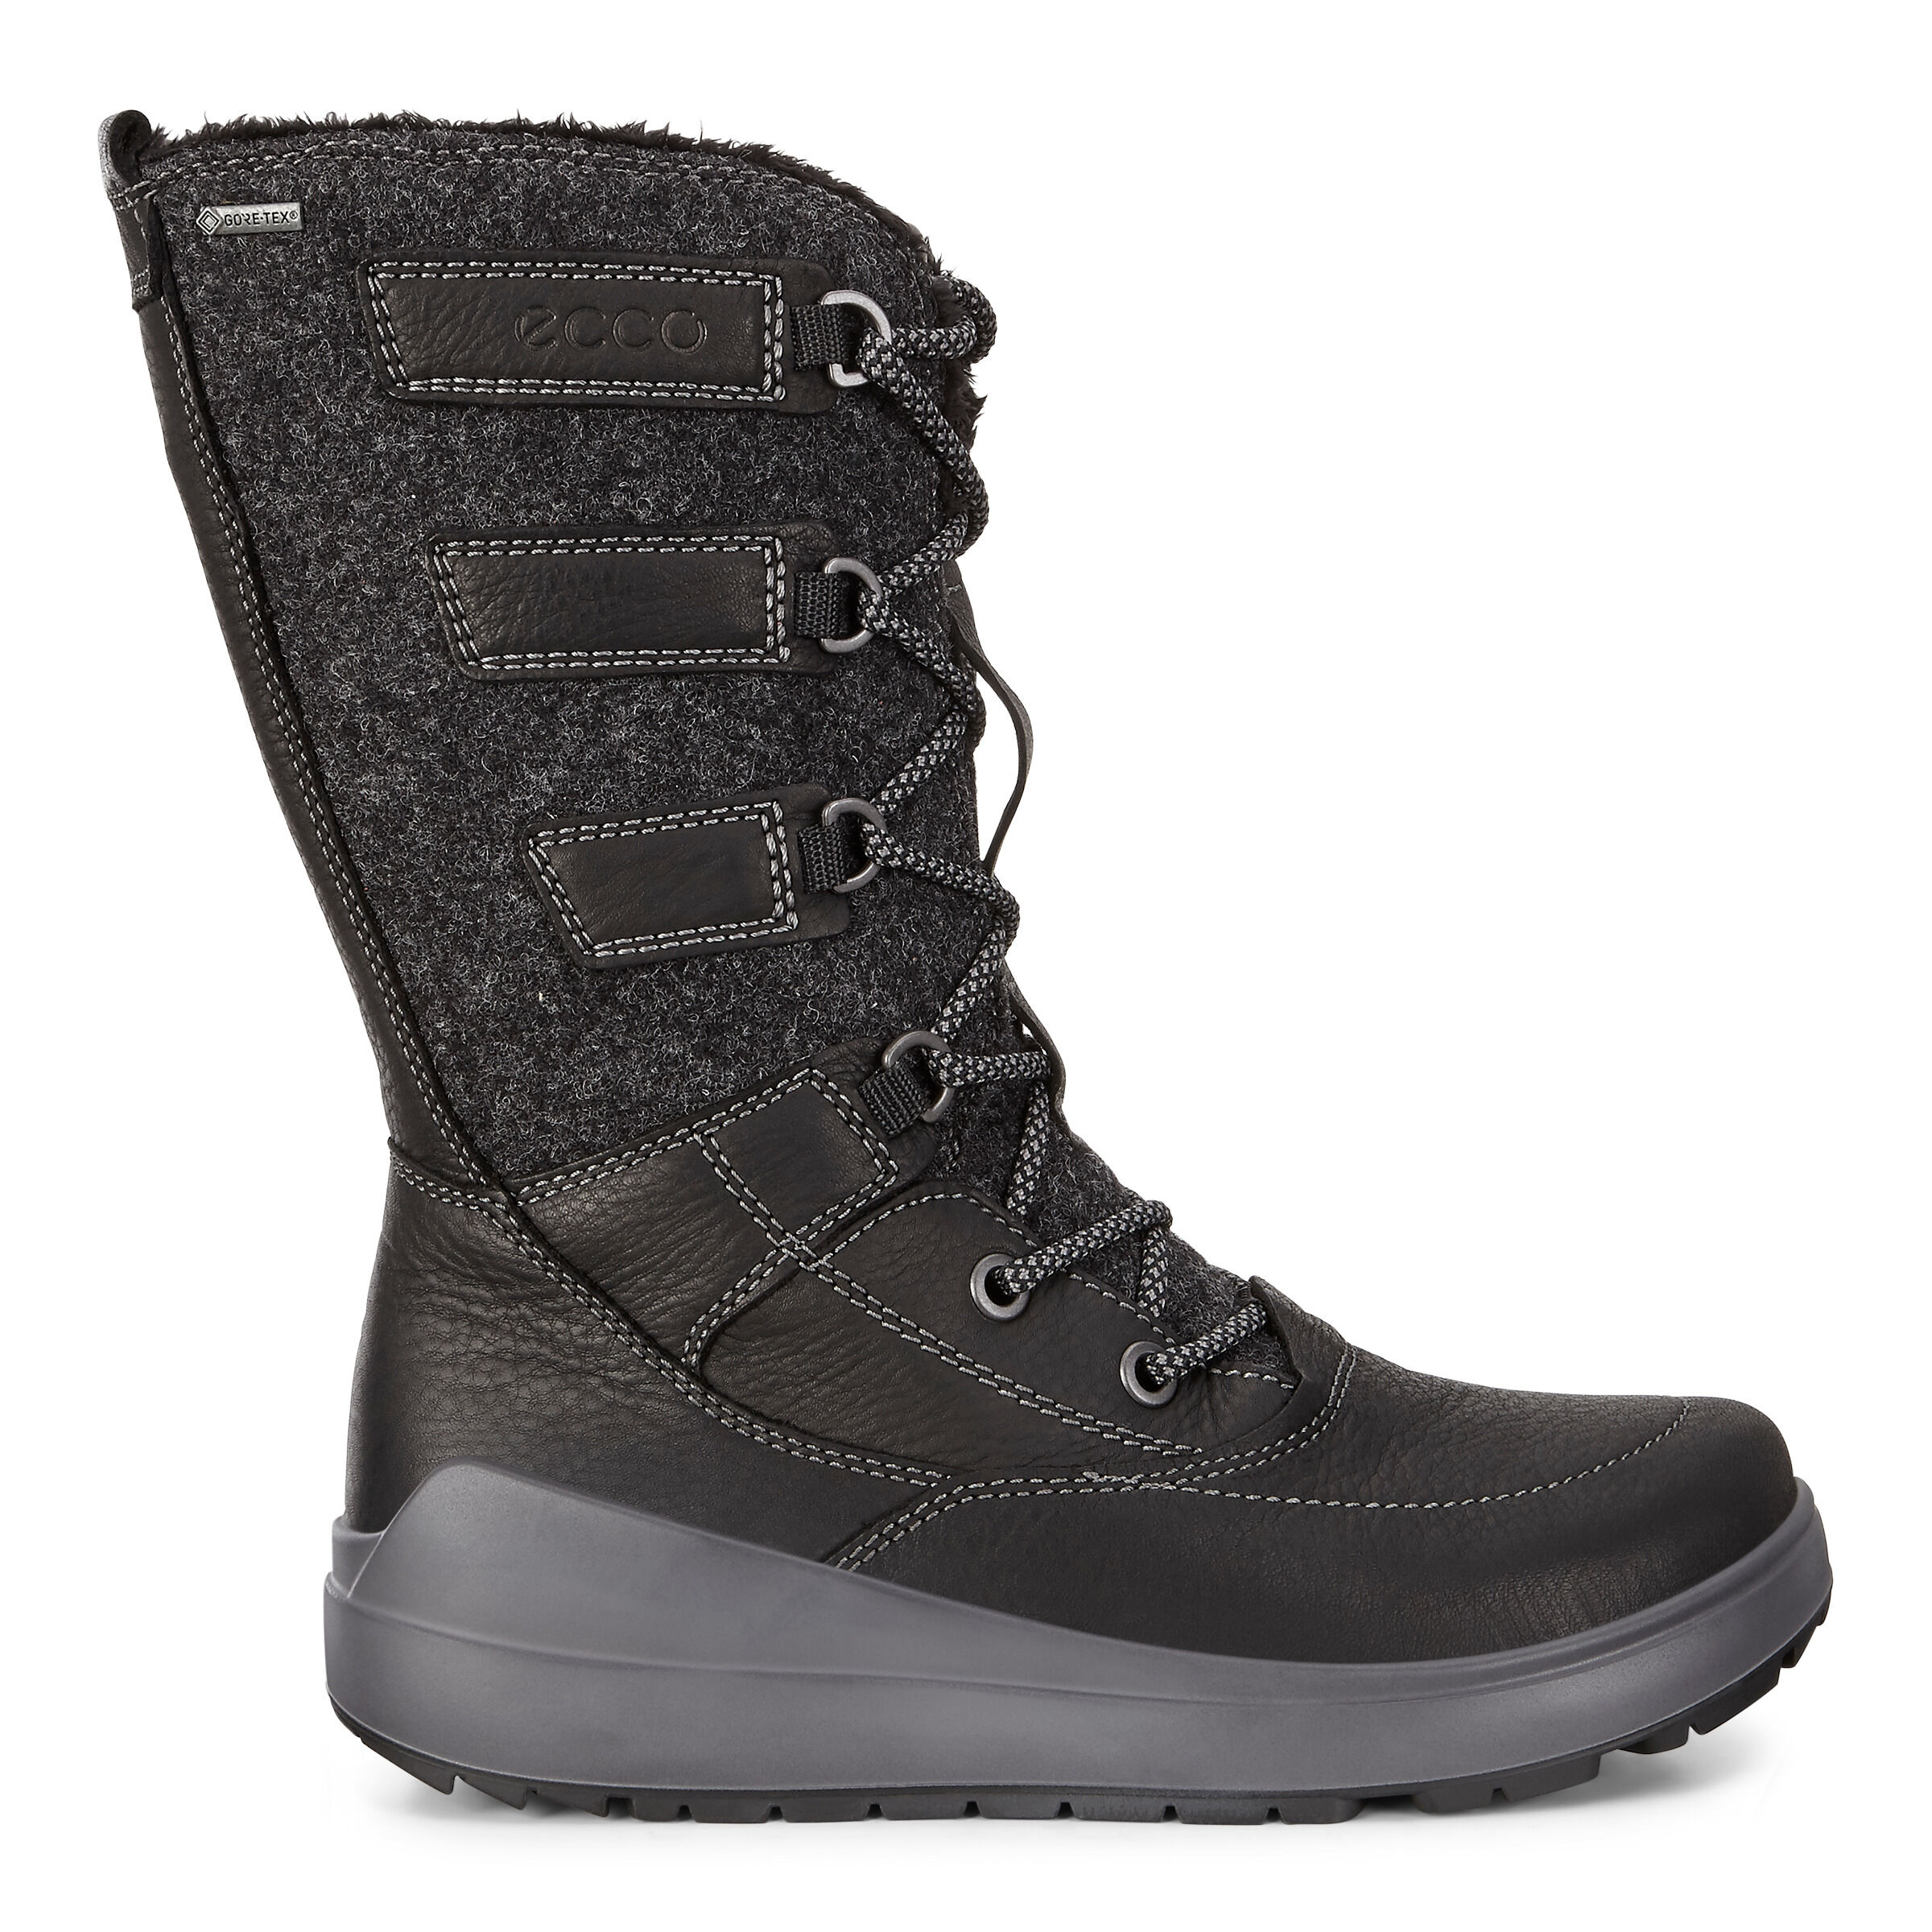 UPC 809704475578 product image for ECCO Womens Noyce GTX High Boots Size 8/8.5 Black | upcitemdb.com